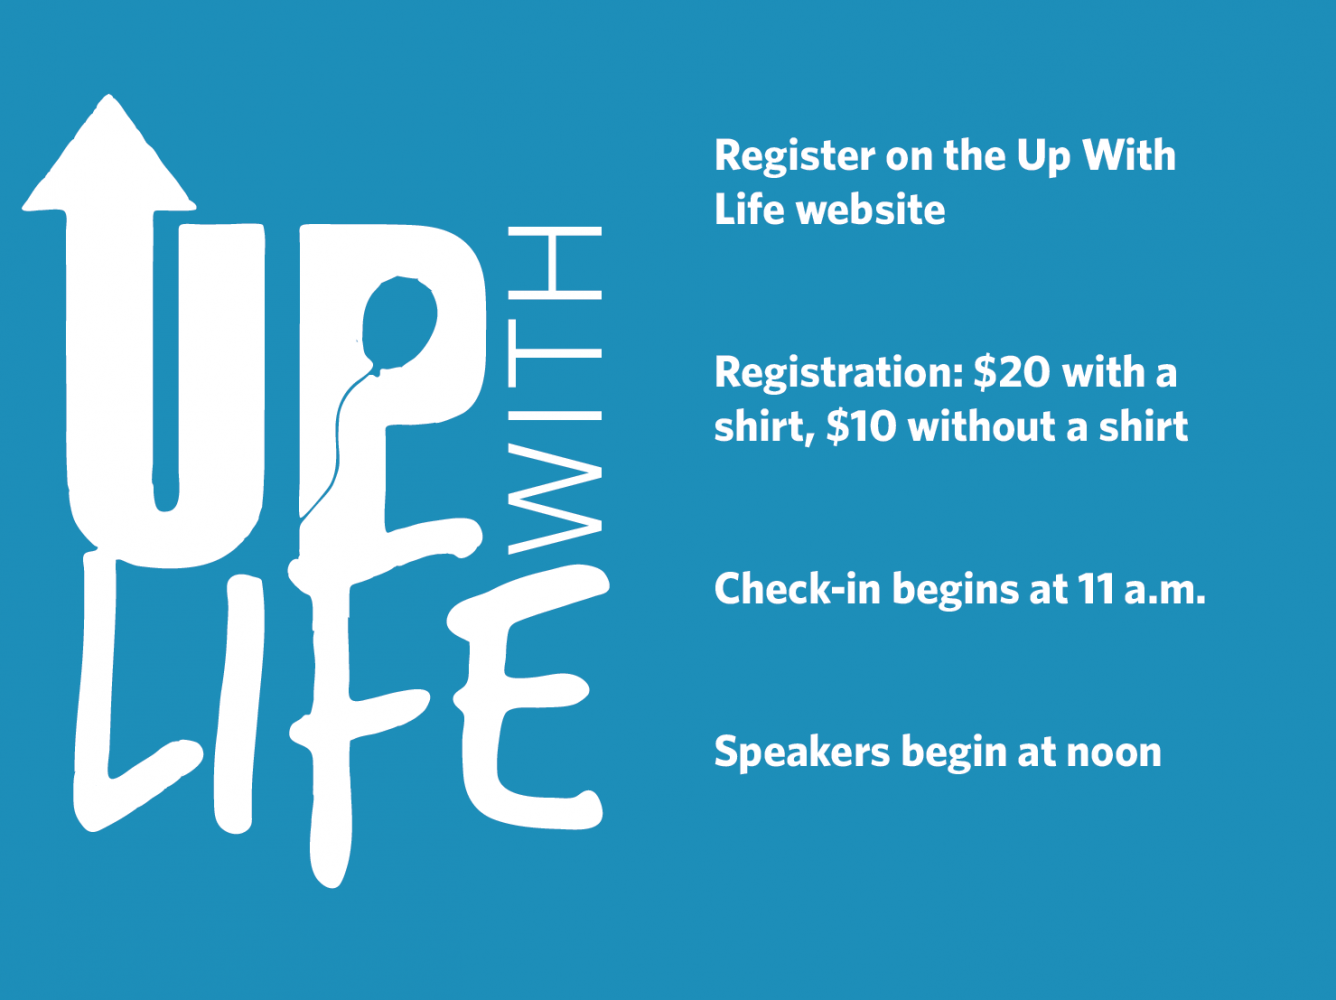 Up+With+Life+Walk+aims+to+spread+suicide+awareness%2C+prevention